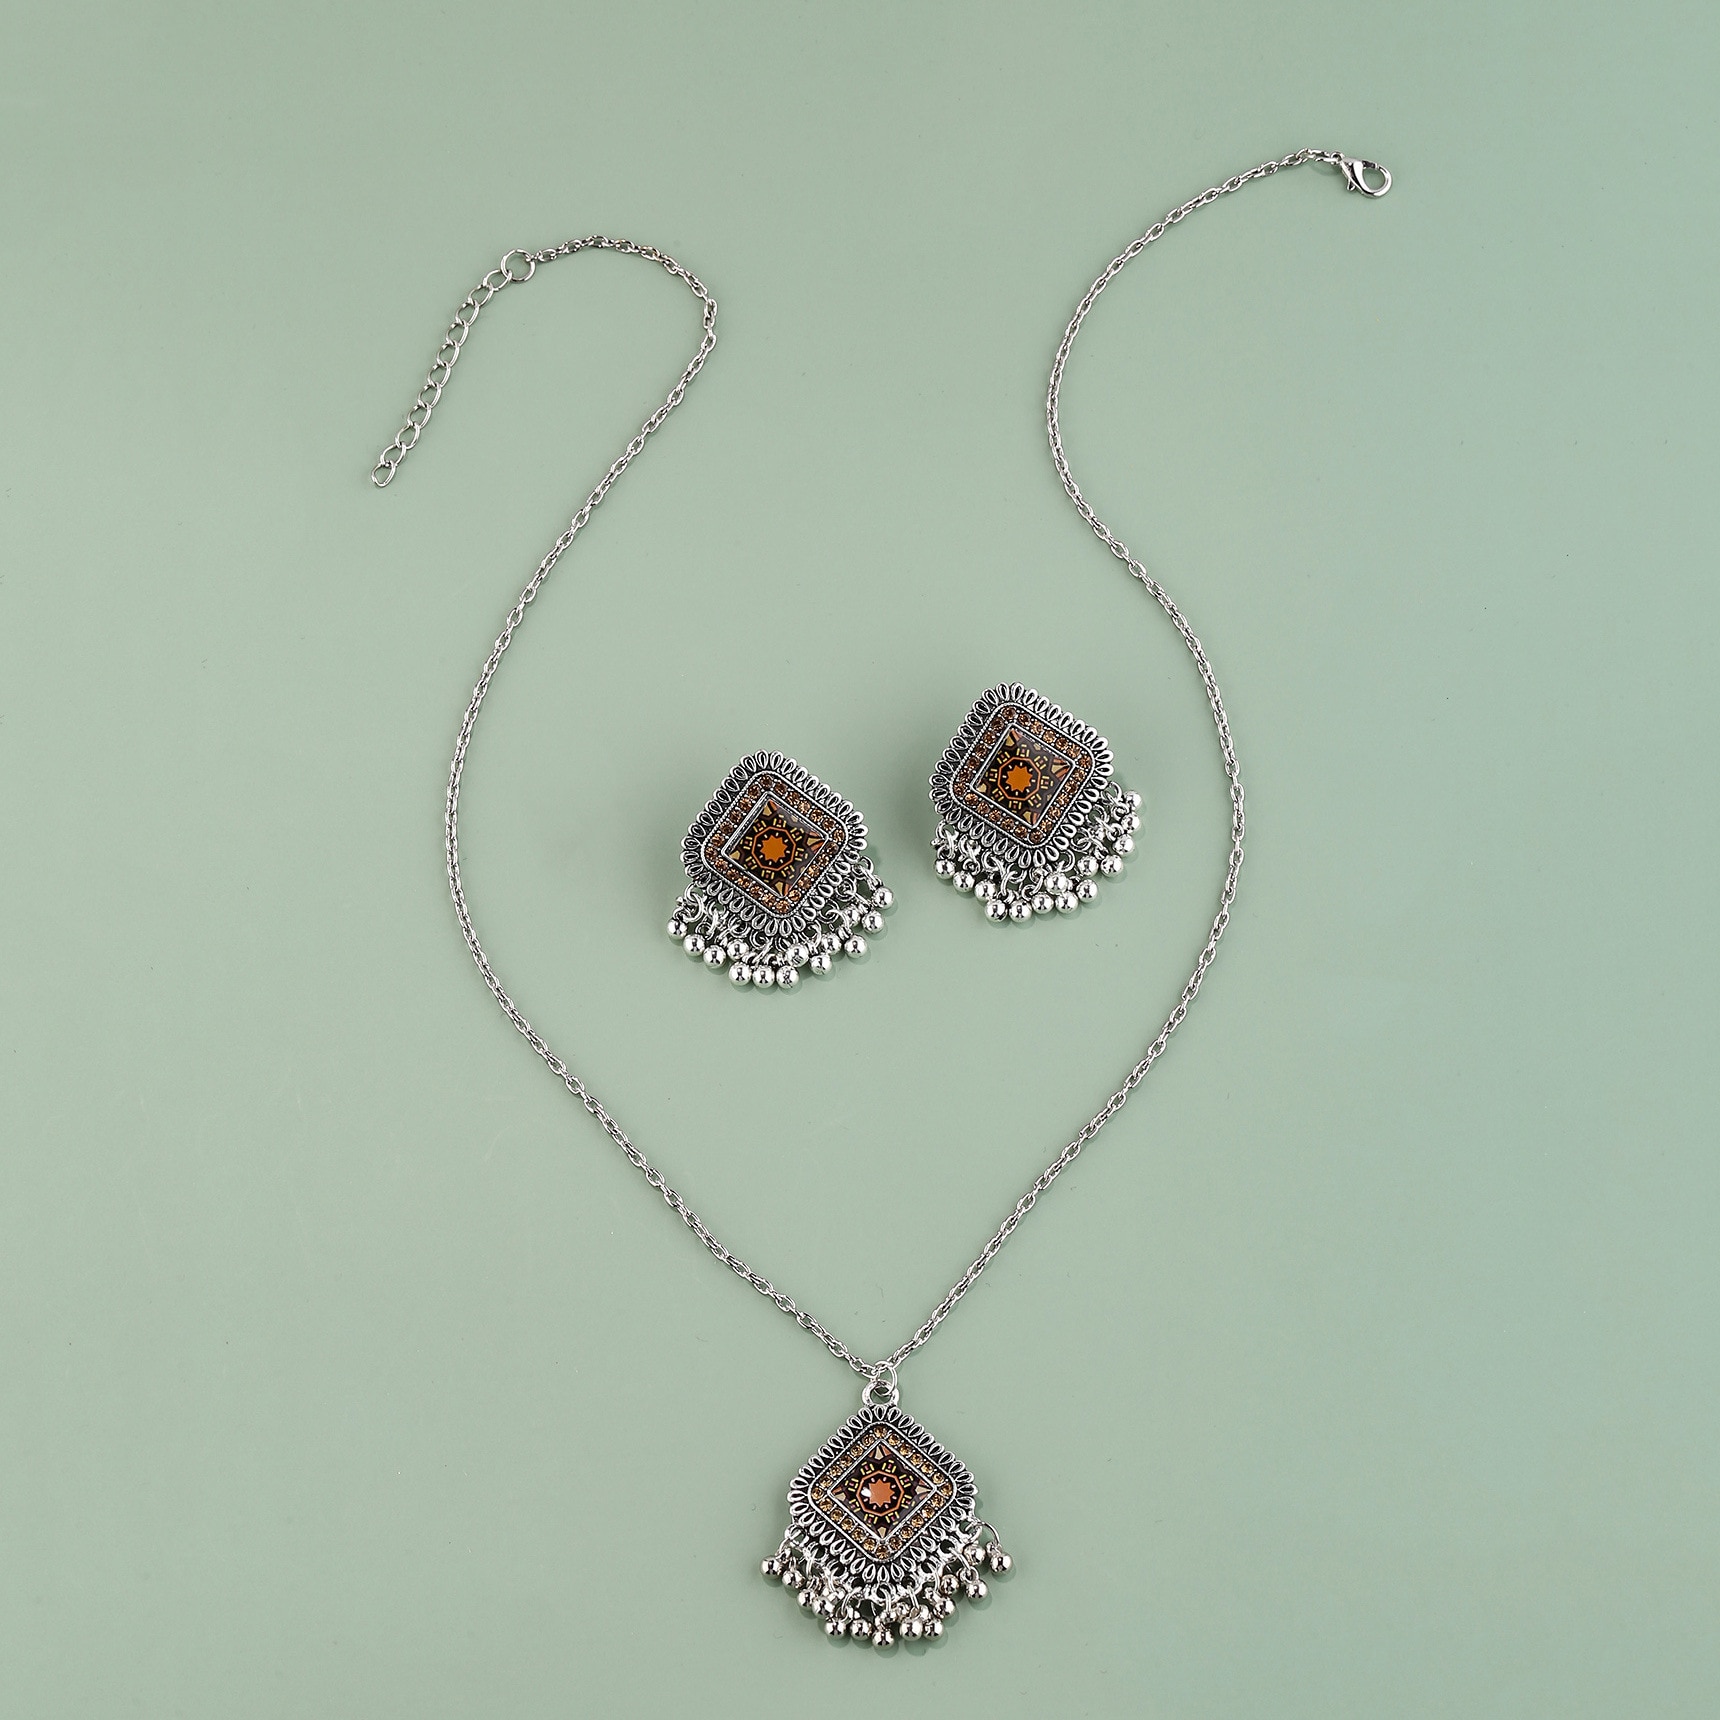 Vintage-Silver-Color-Flower-Jewelry-Sets-For-Women-Bell-Tassel-Necklaces-Earring-Bridal-Afghan-India-3256804350137978-3